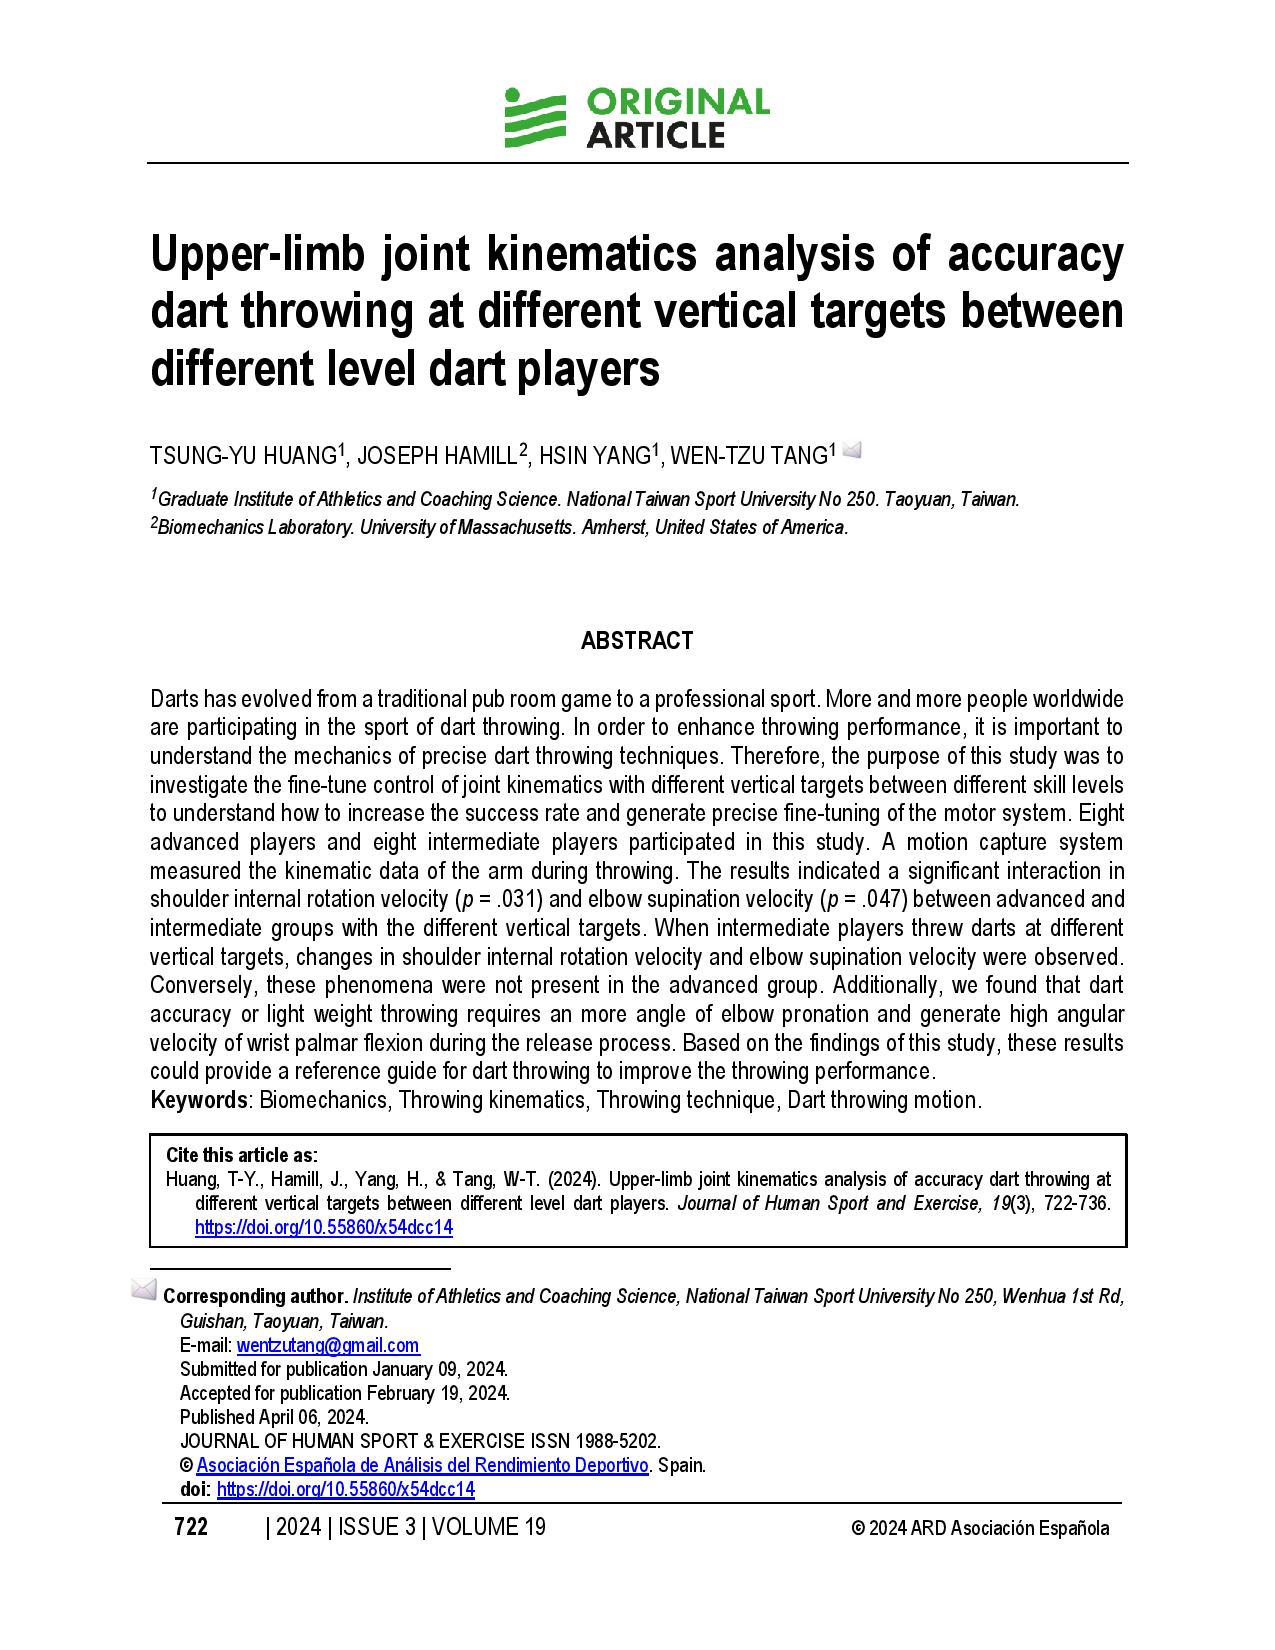 Upper-limb joint kinematics analysis of accuracy dart throwing at different vertical targets between different level dart players